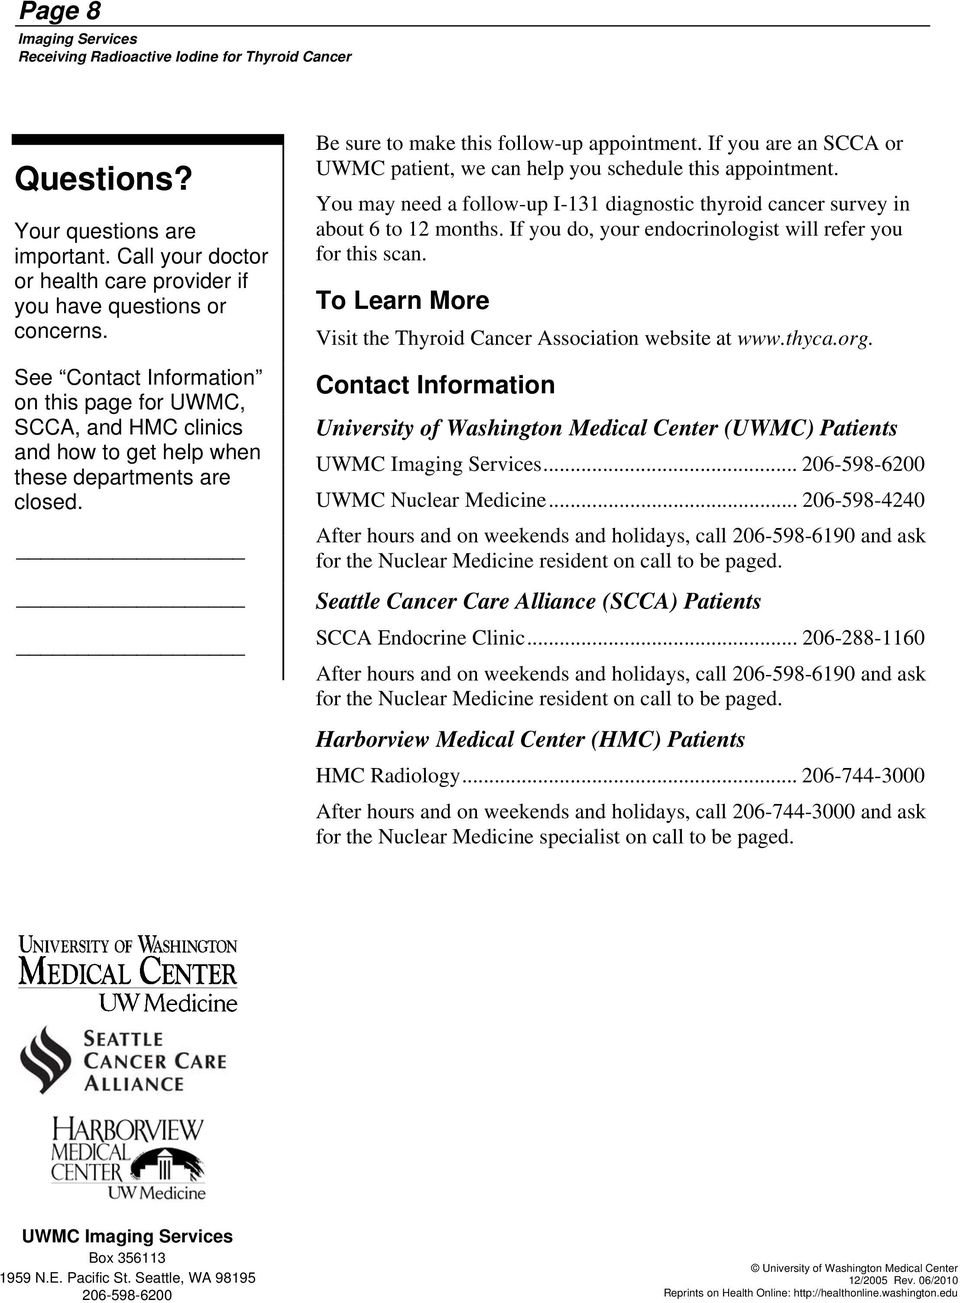 If you are an SCCA or UWMC patient, we can help you schedule this appointment. You may need a follow-up I-131 diagnostic thyroid cancer survey in about 6 to 12 months.